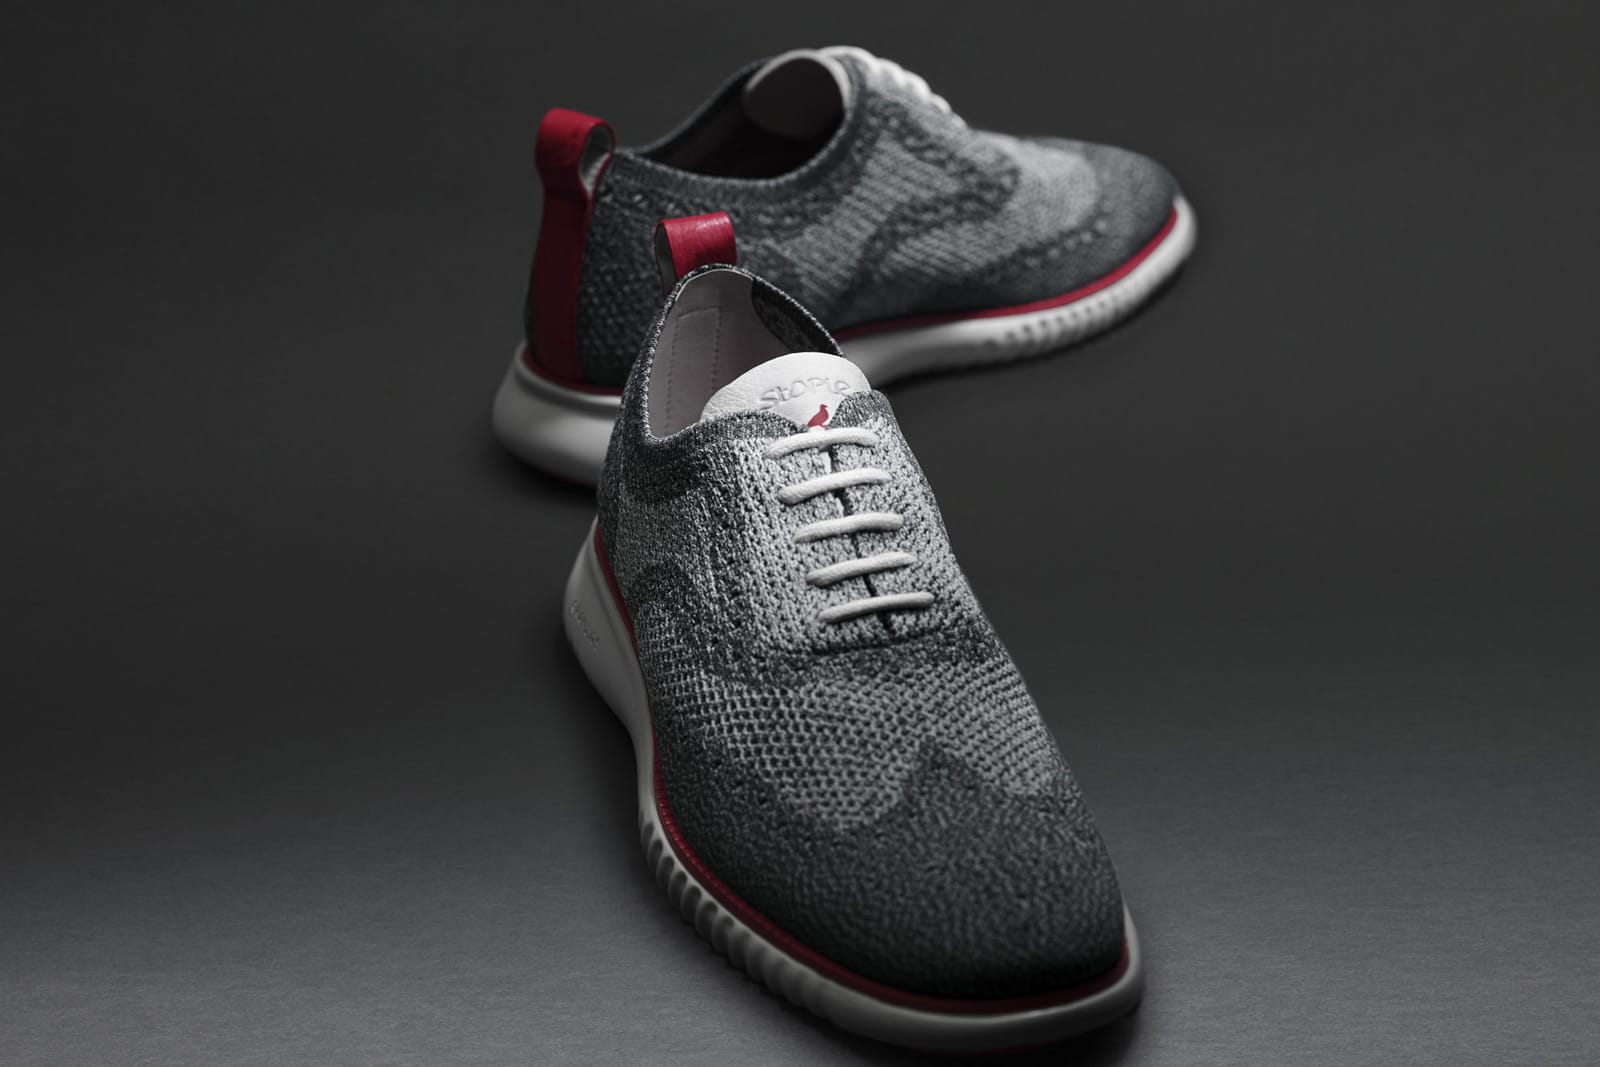 Staple x Cole Haan Limited Edition 2 